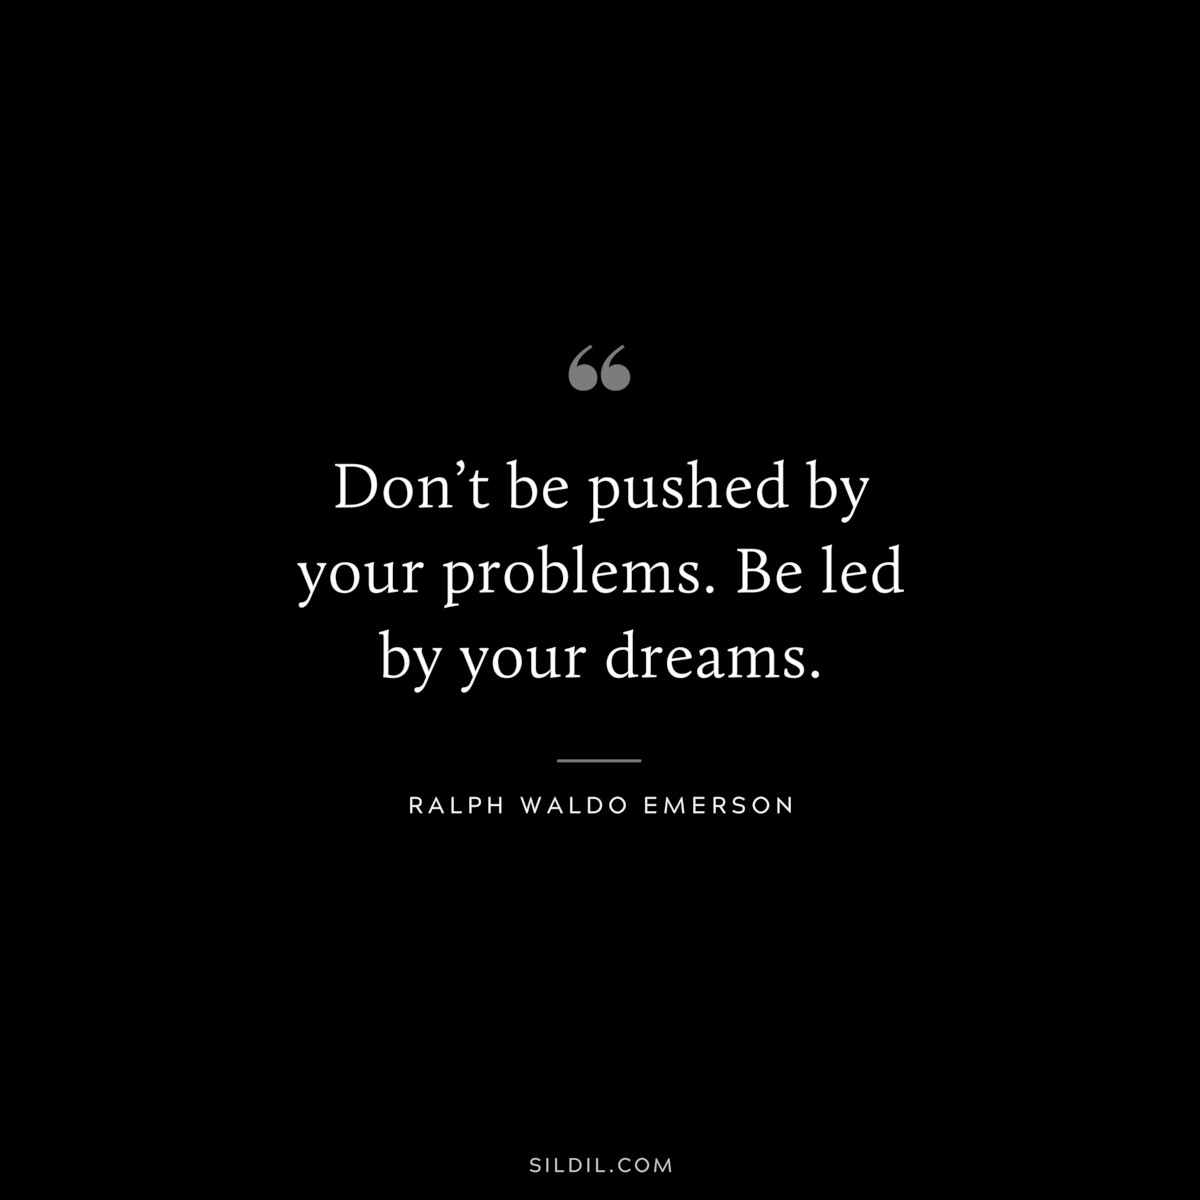 Don’t be pushed by your problems. Be led by your dreams. — Ralph Waldo Emerson